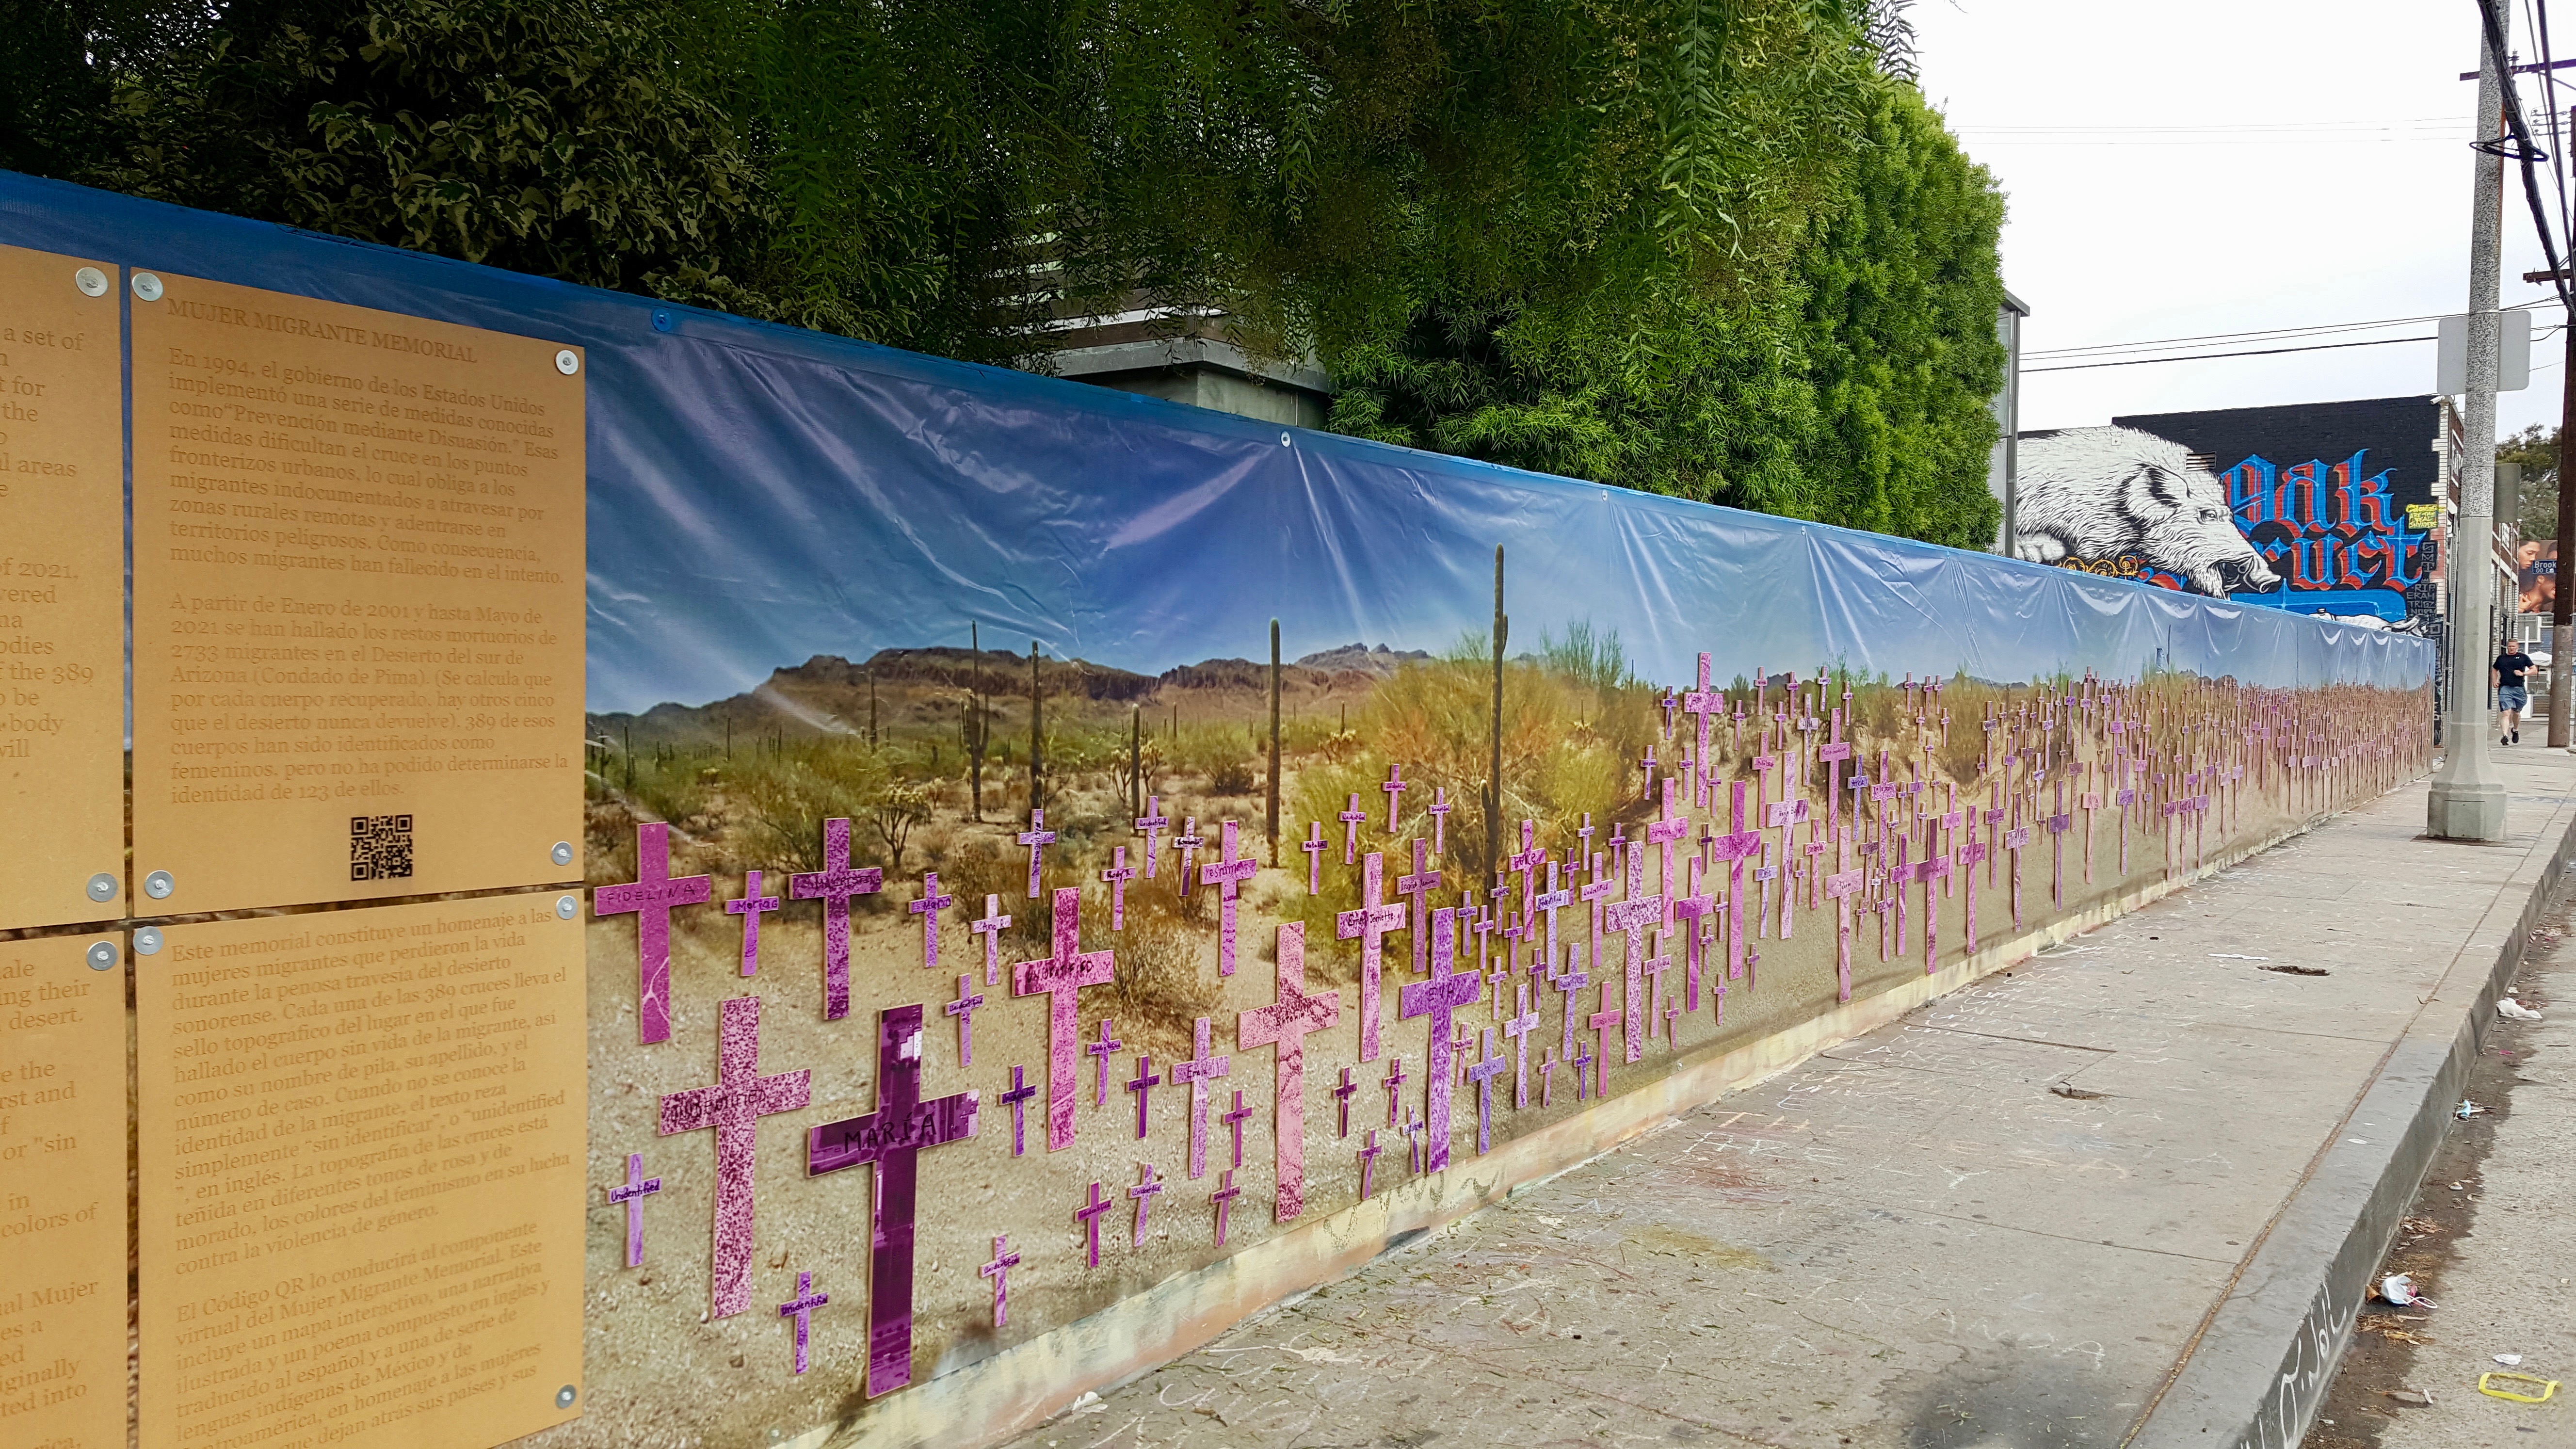 To try to balance against the stark brutality of the numbers, the crosses are shrouded in a color filter of soft pink and purple to represent the fight of international feminism against gender violence.